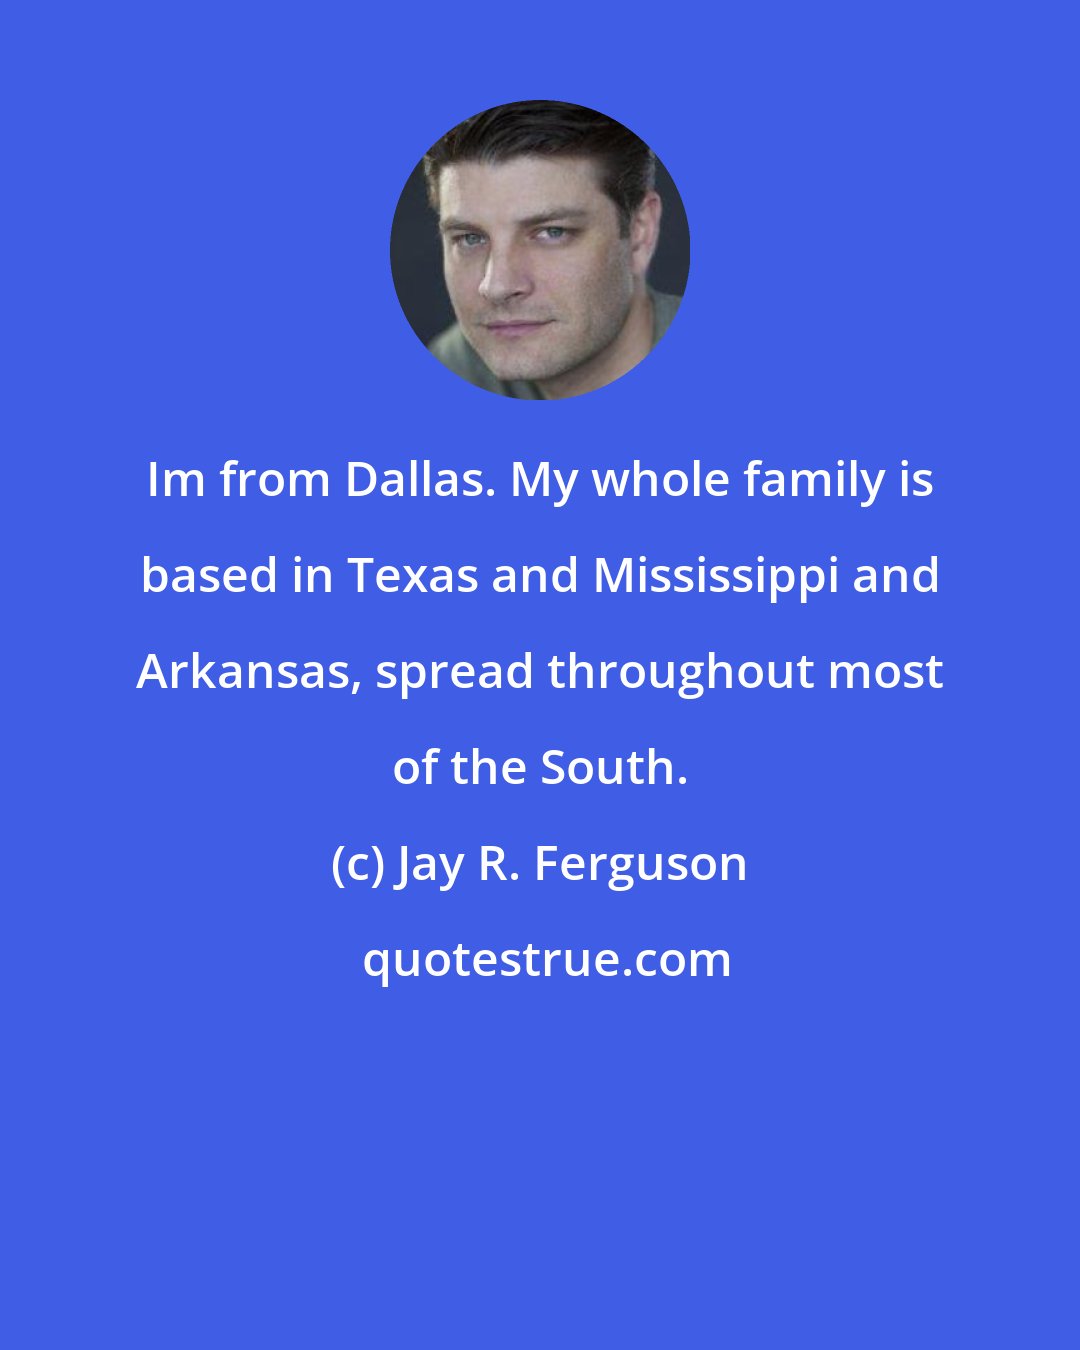 Jay R. Ferguson: Im from Dallas. My whole family is based in Texas and Mississippi and Arkansas, spread throughout most of the South.